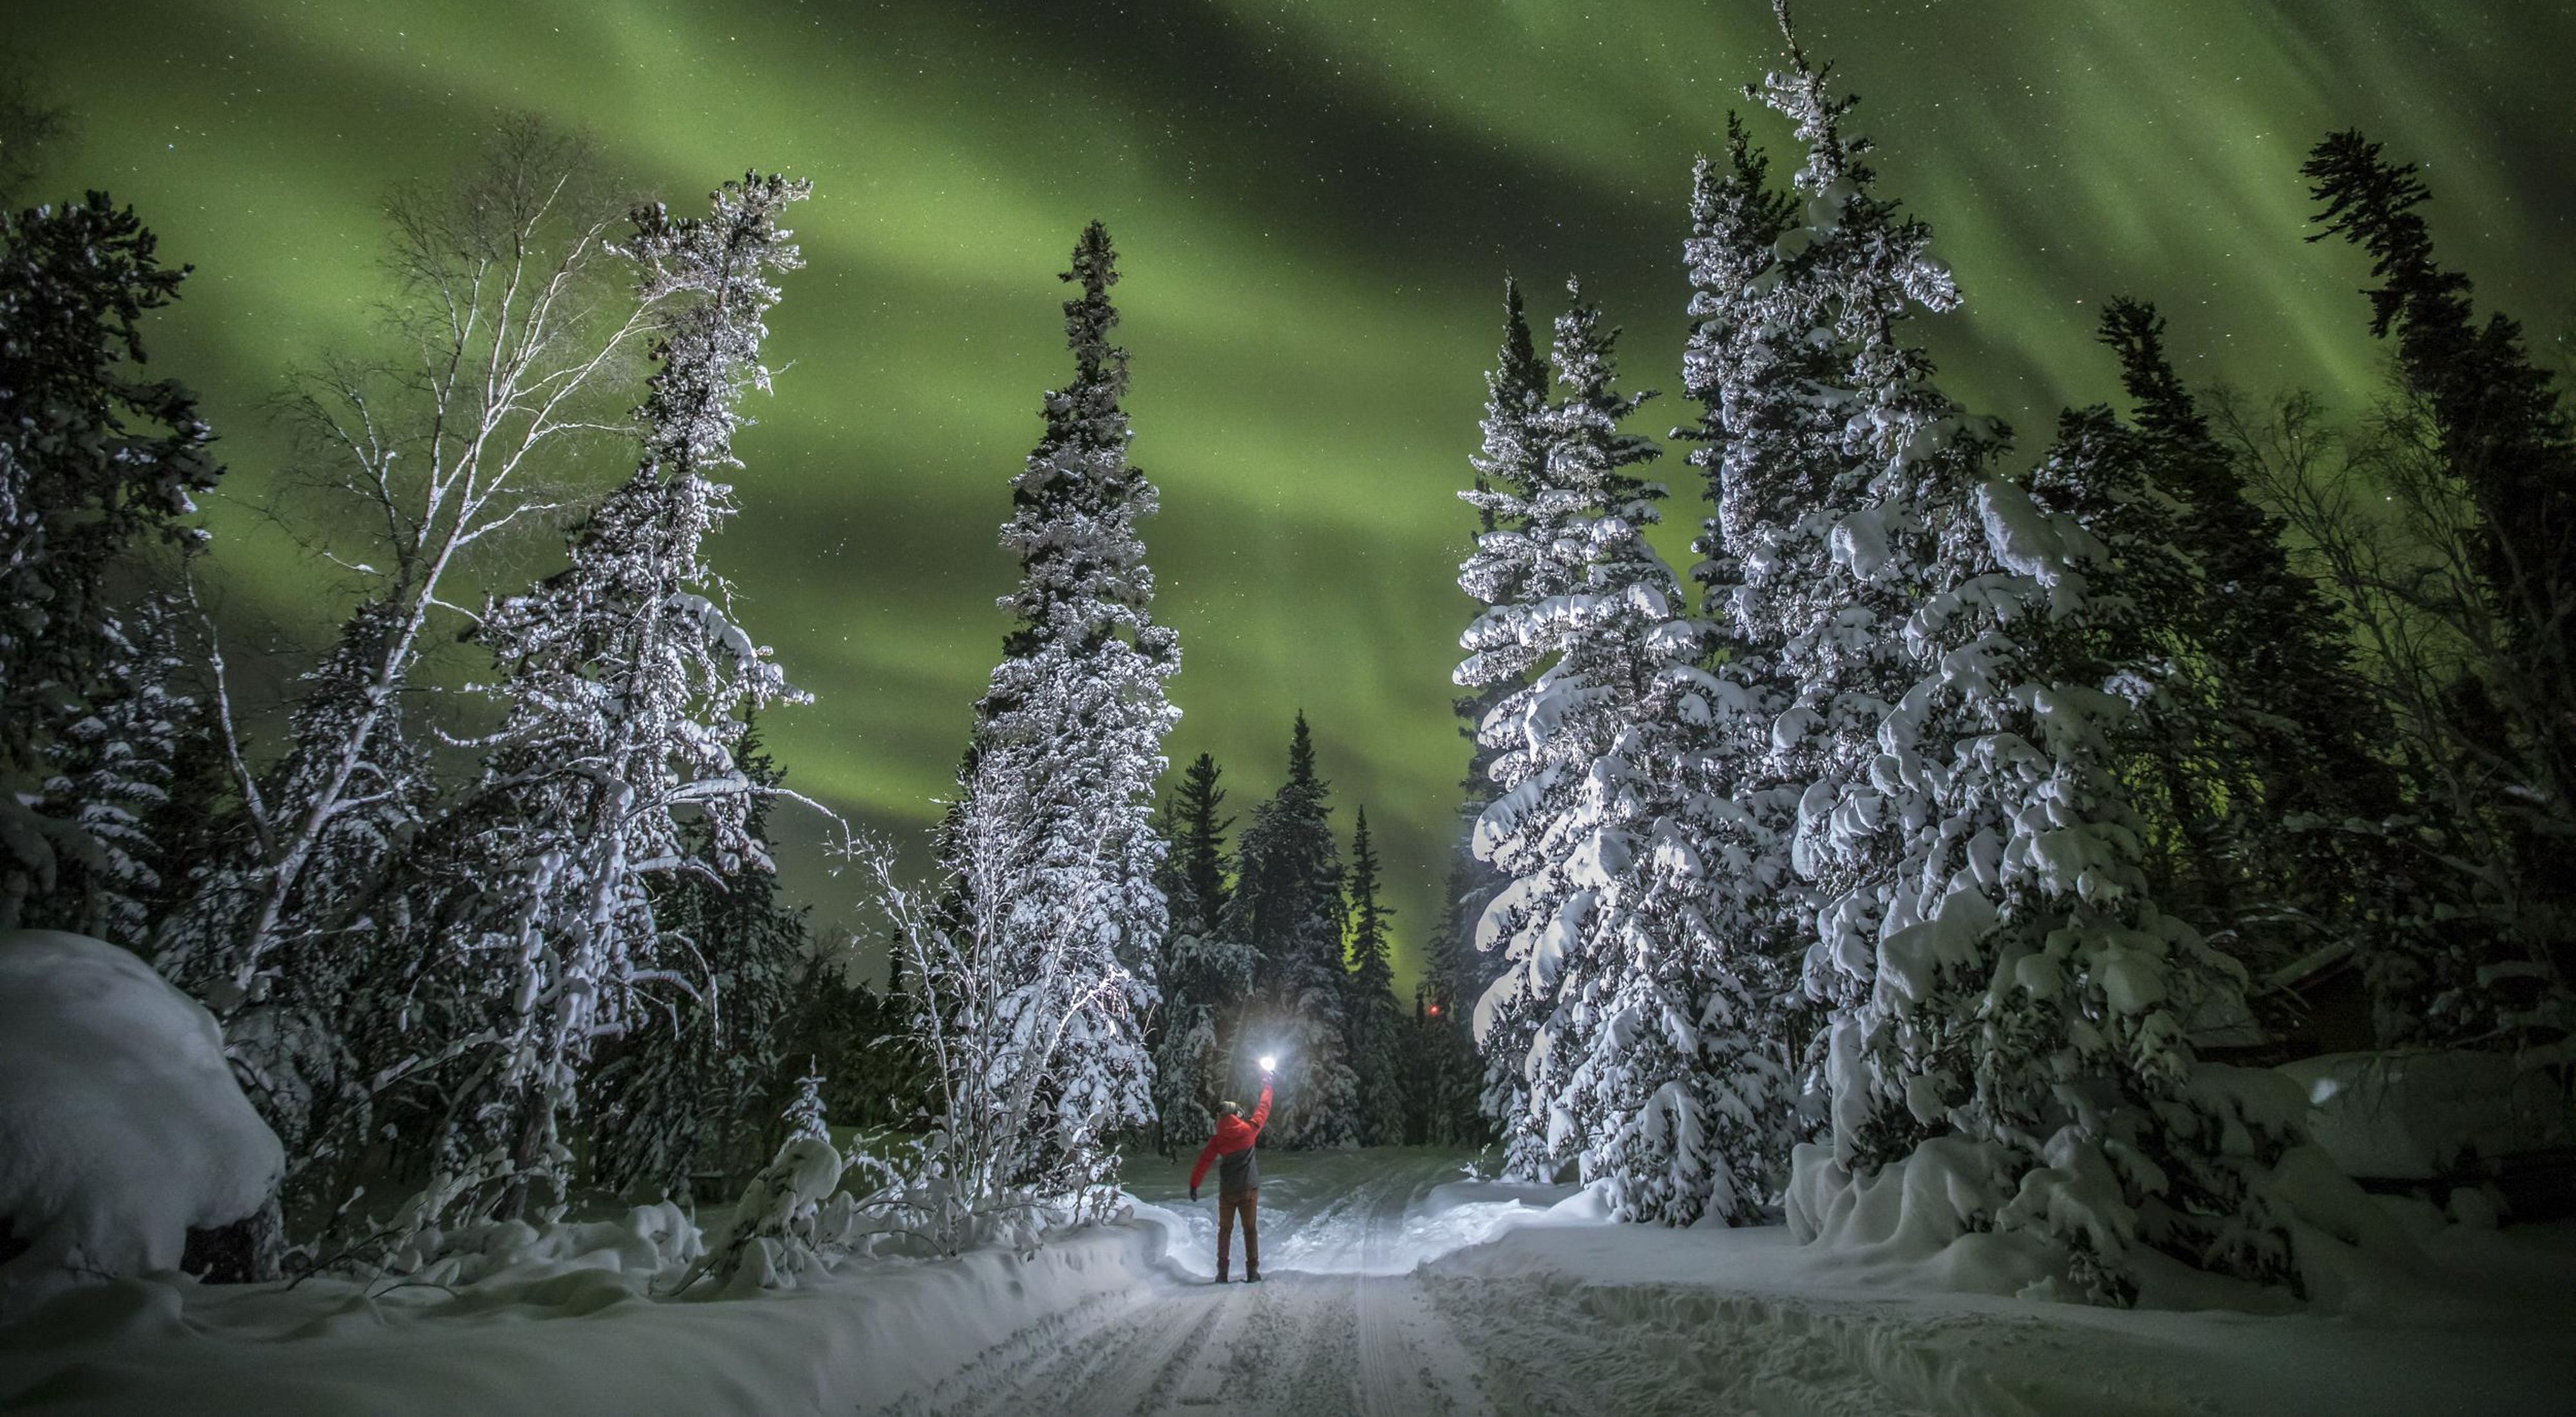 A person holds a light ball to illuminate the snowy trees under the northern lights in Northwest Territories, Canada.